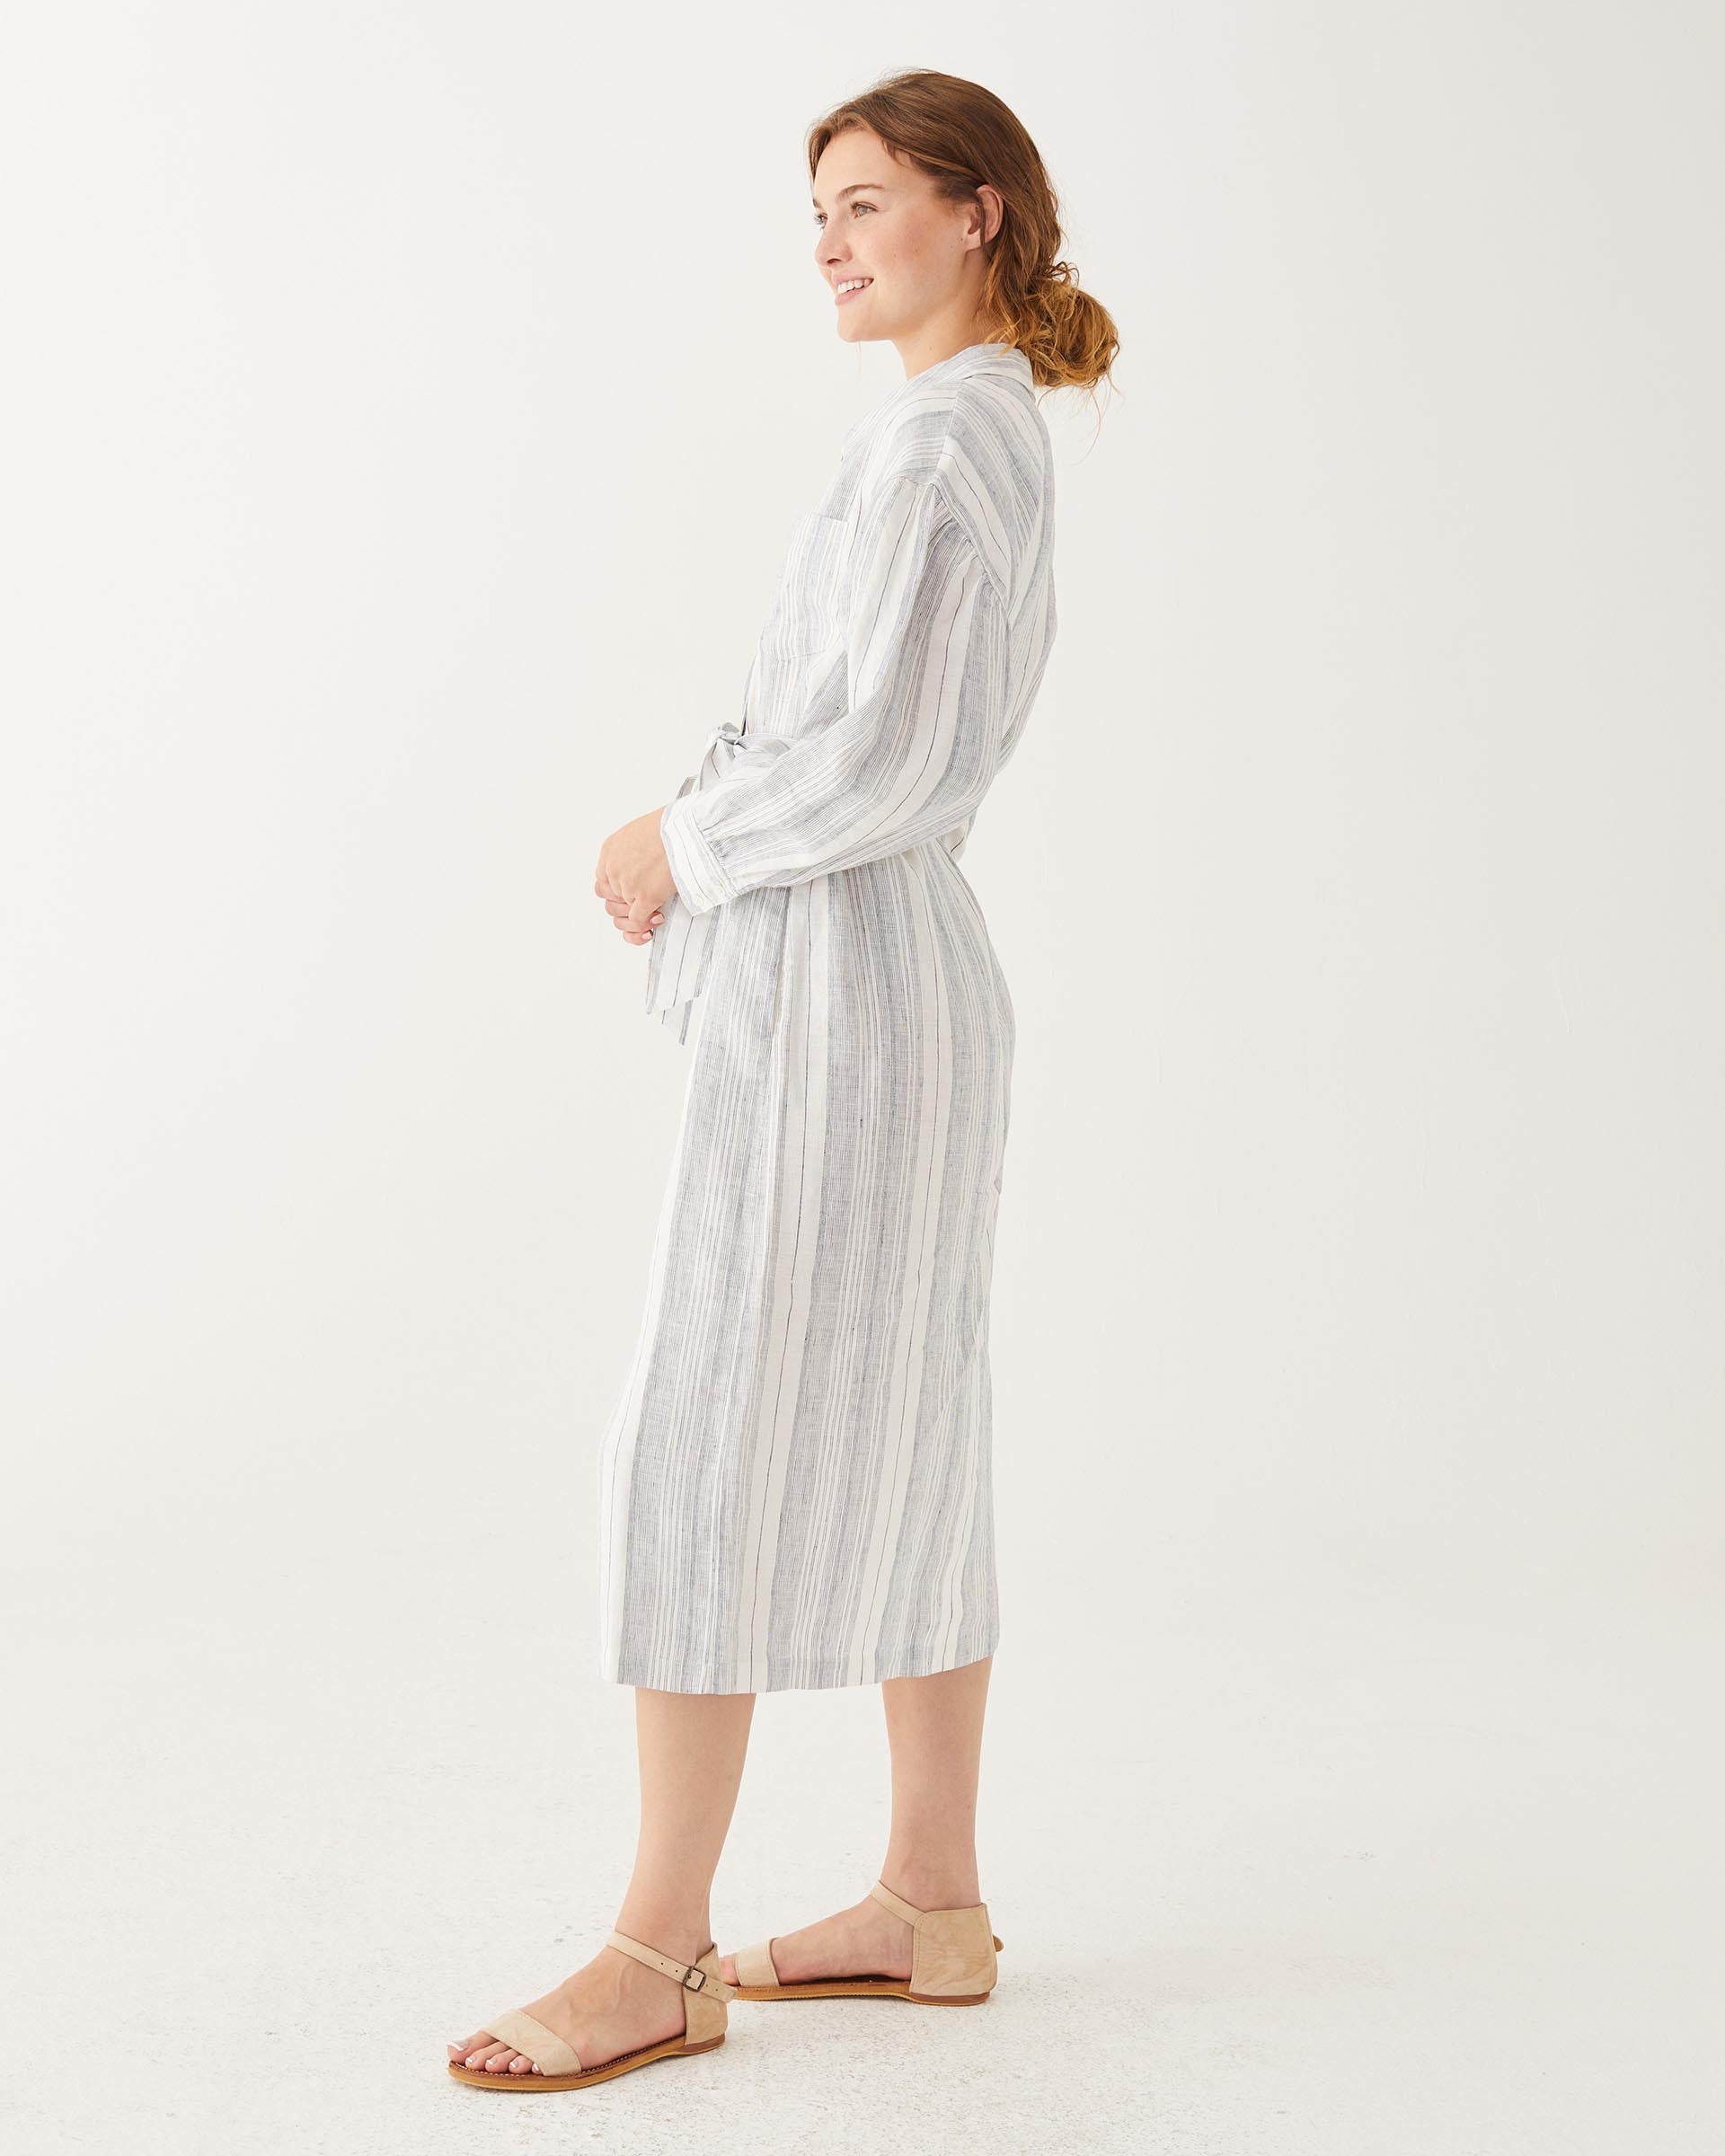 female wearing linen striped collared dress with belt and front button sideways on white background